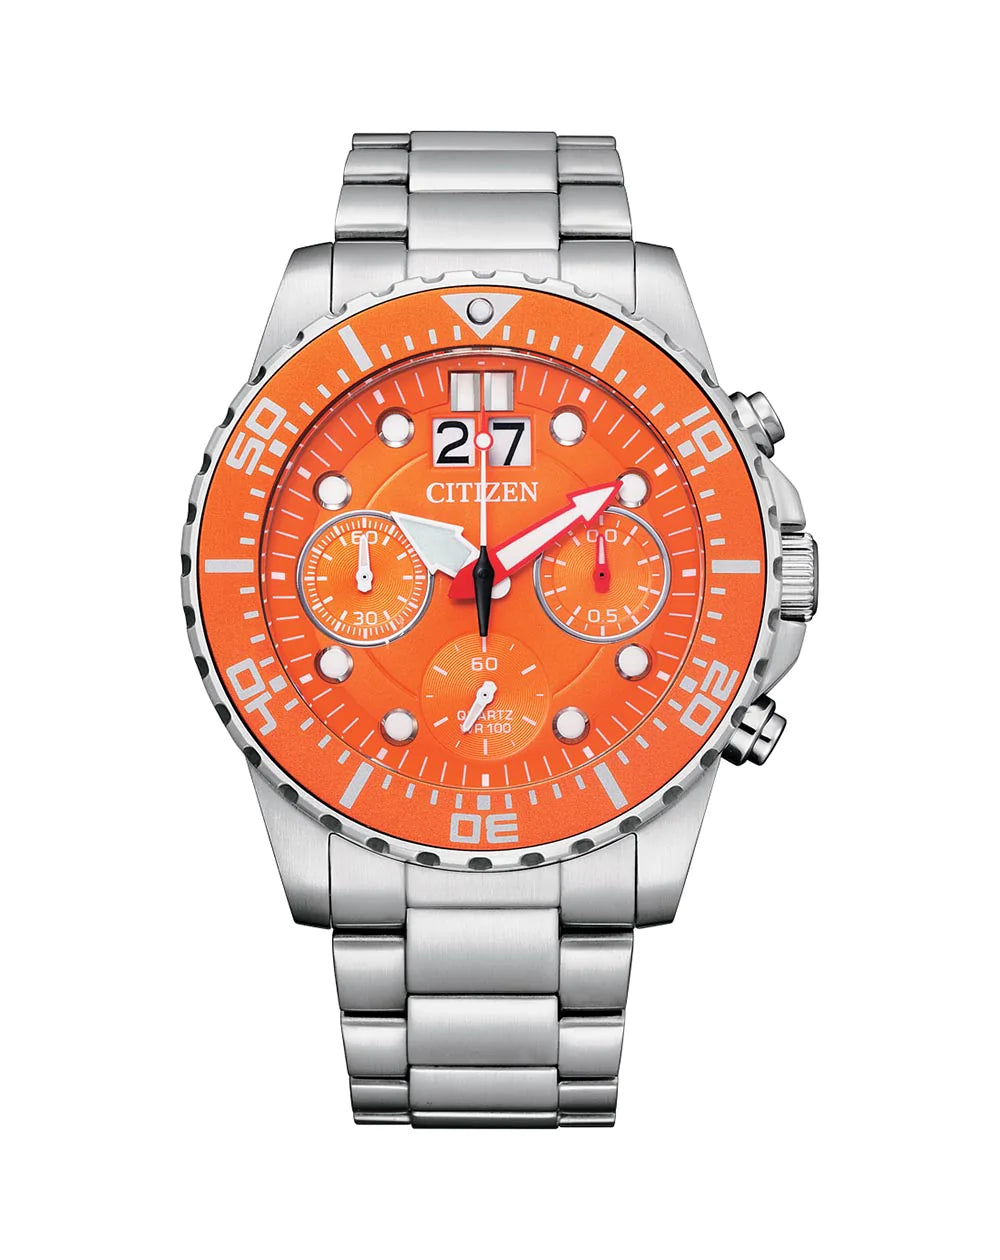 Gents Citizen Chronograph Watch with Orange Dial